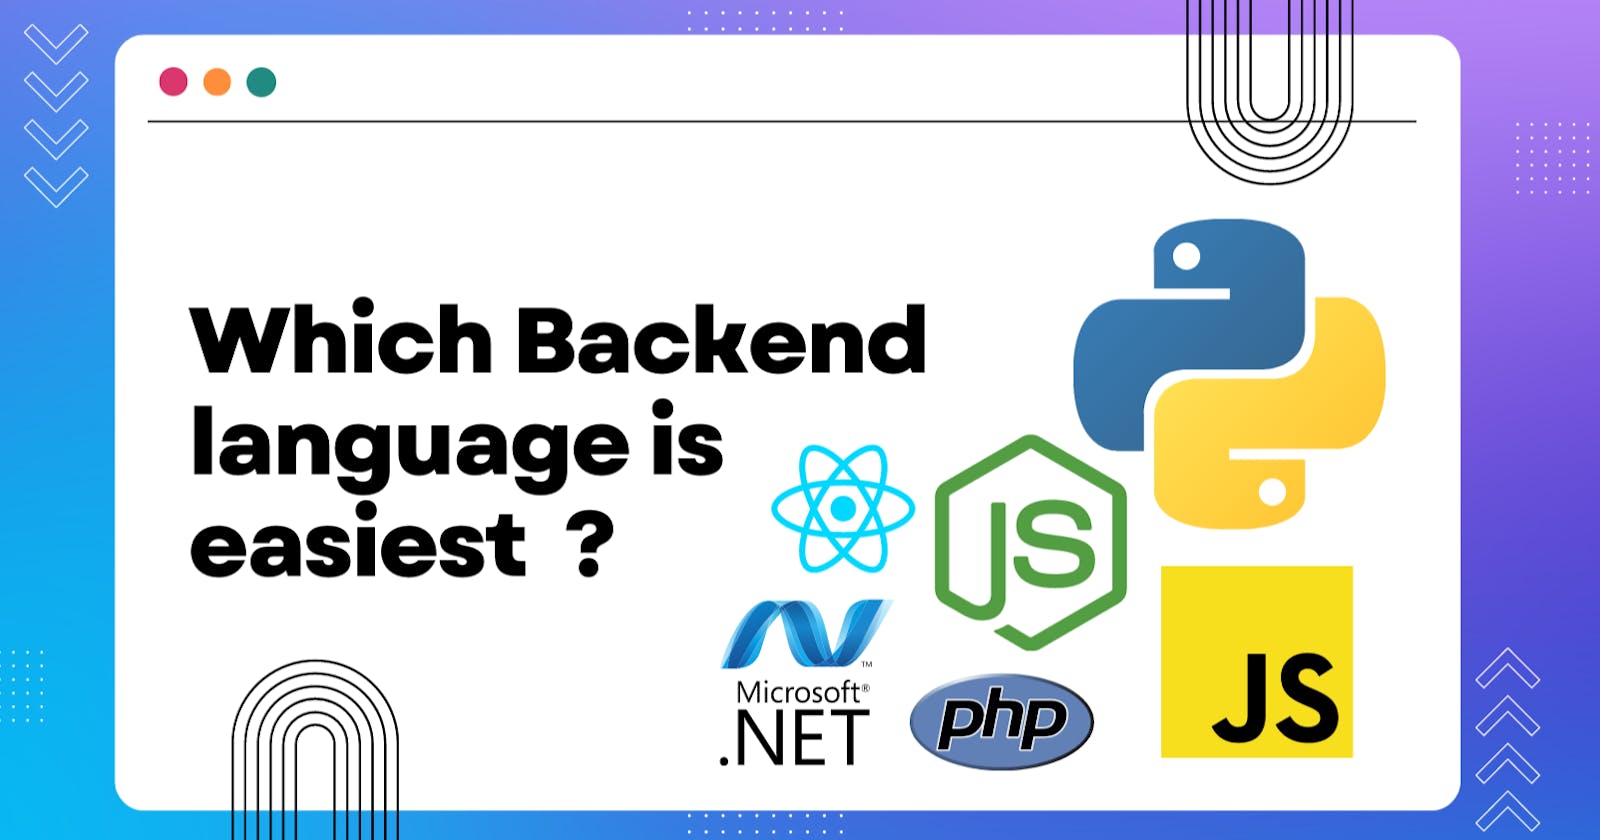 Which Backend Language is Easiest?